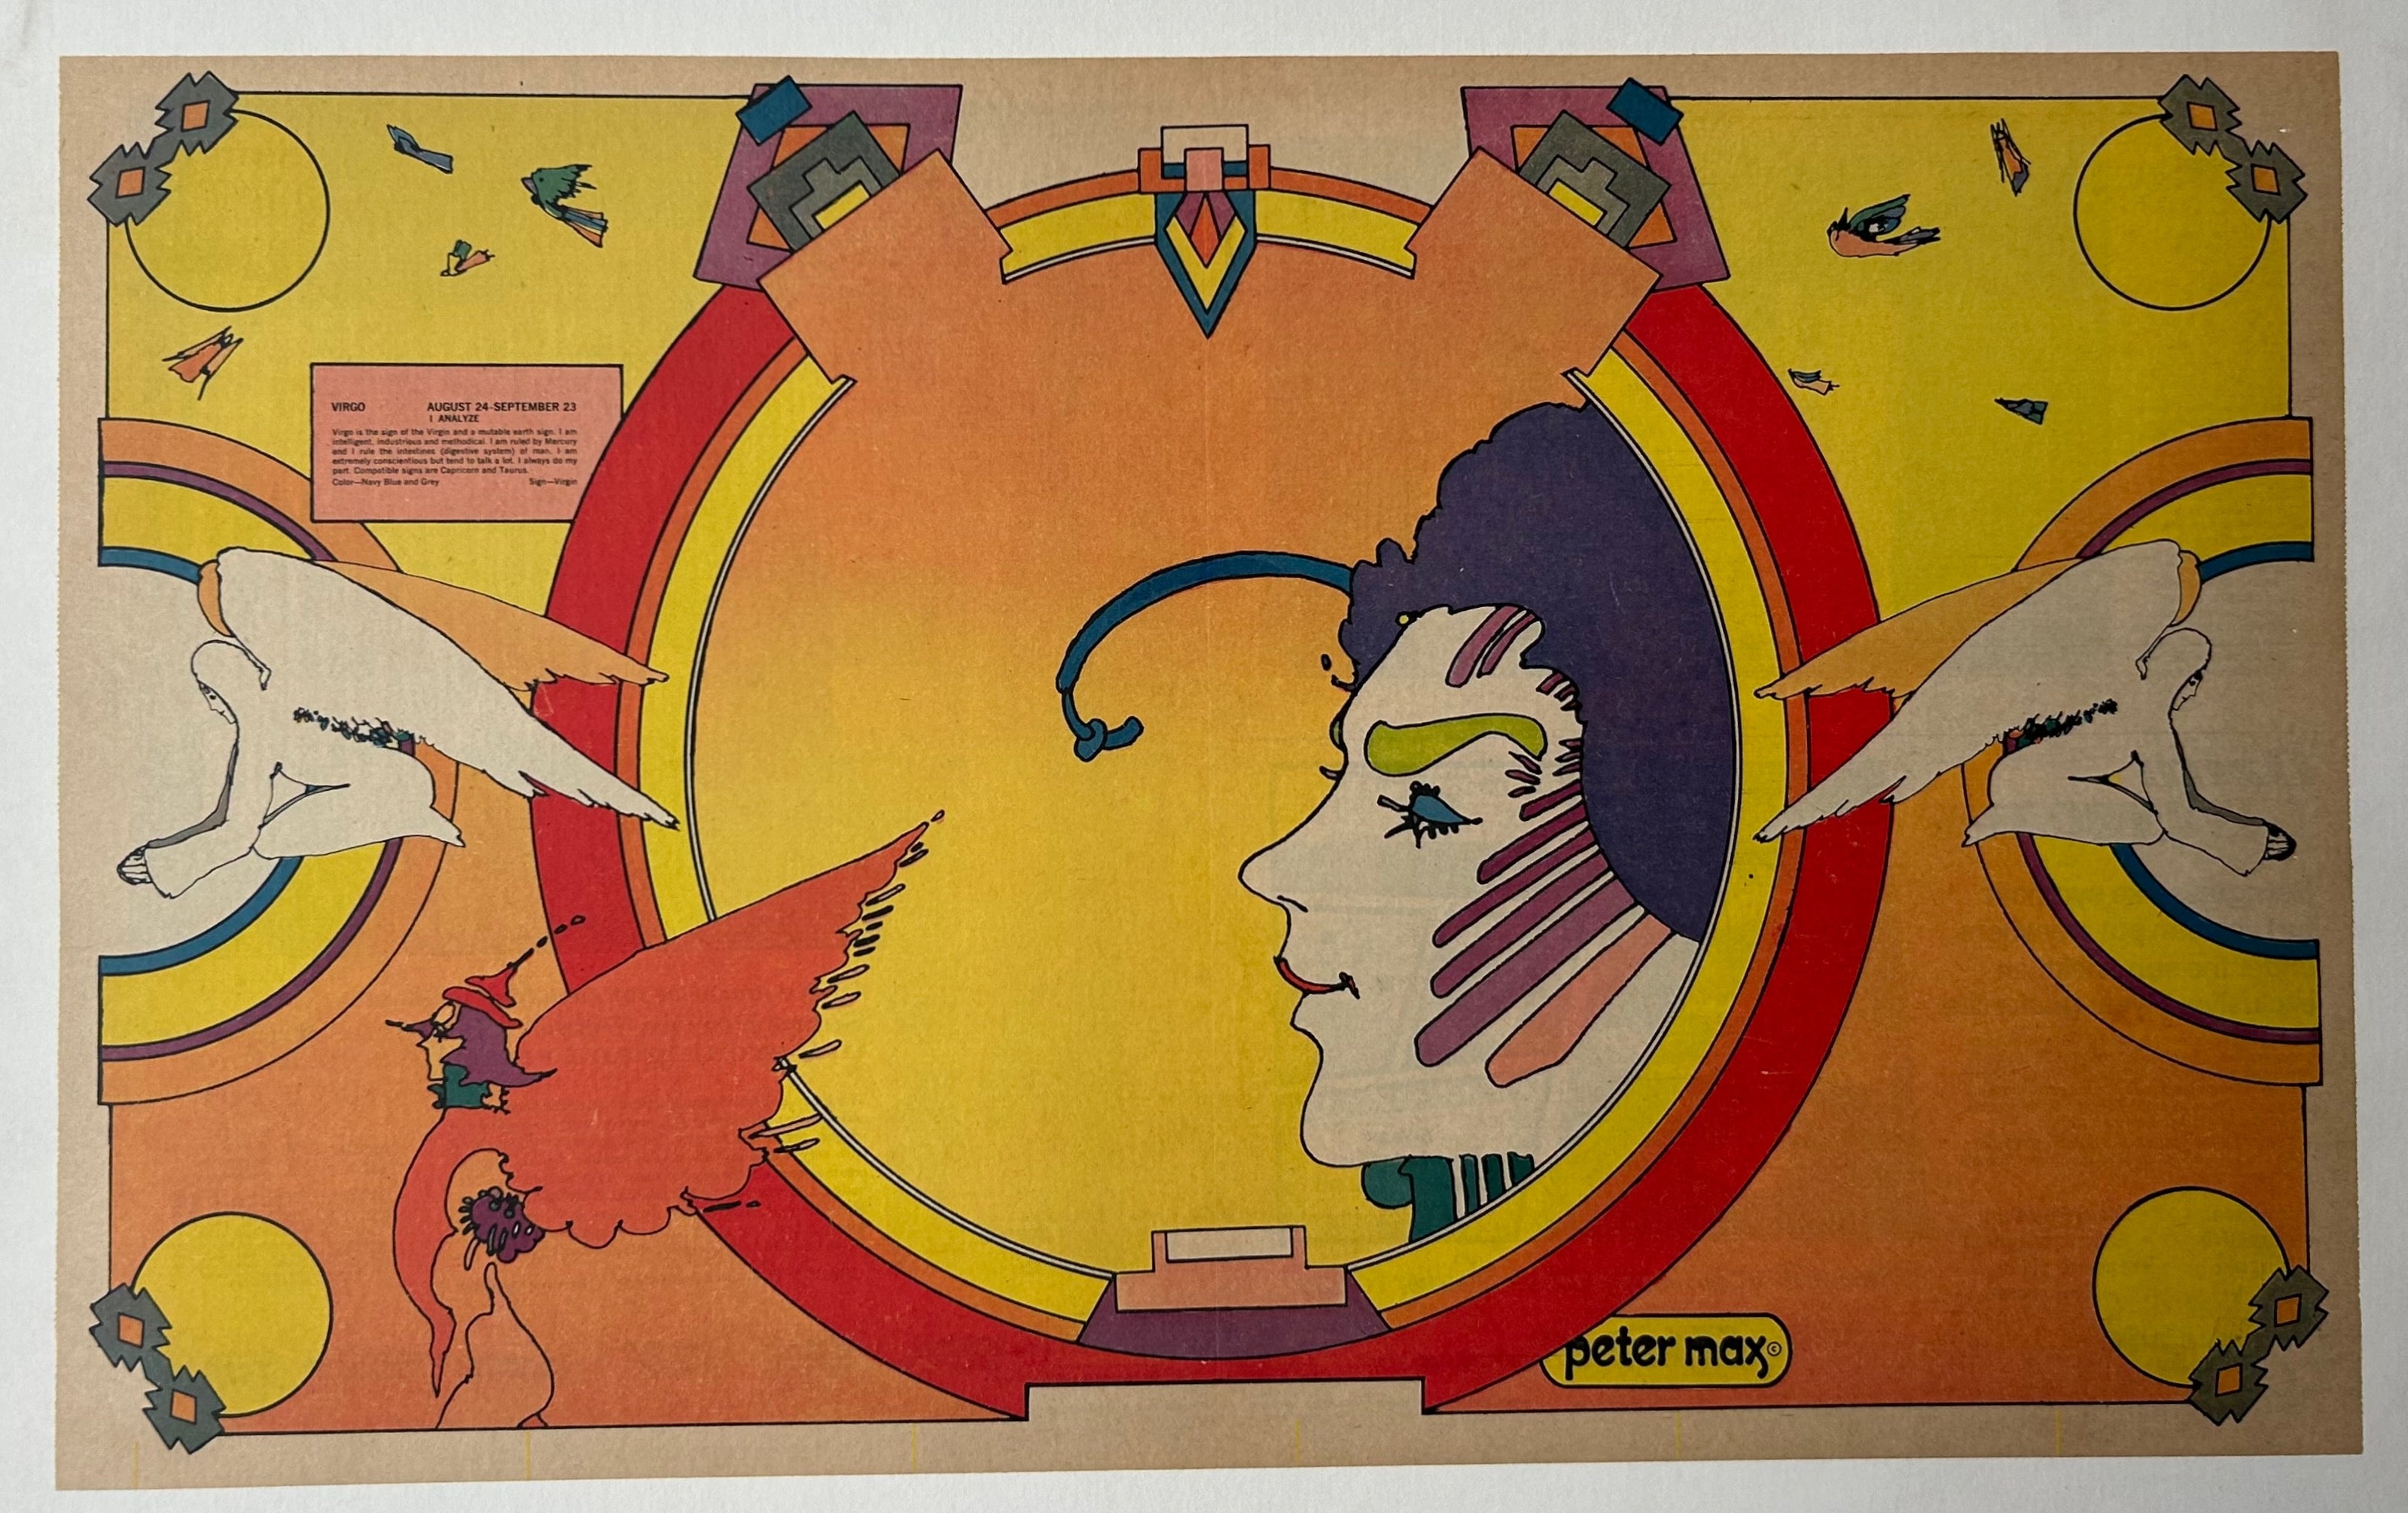 13.5x21.5 zodiac color lithograph by peter max; virgo featuring unique stylized illustration and sign description